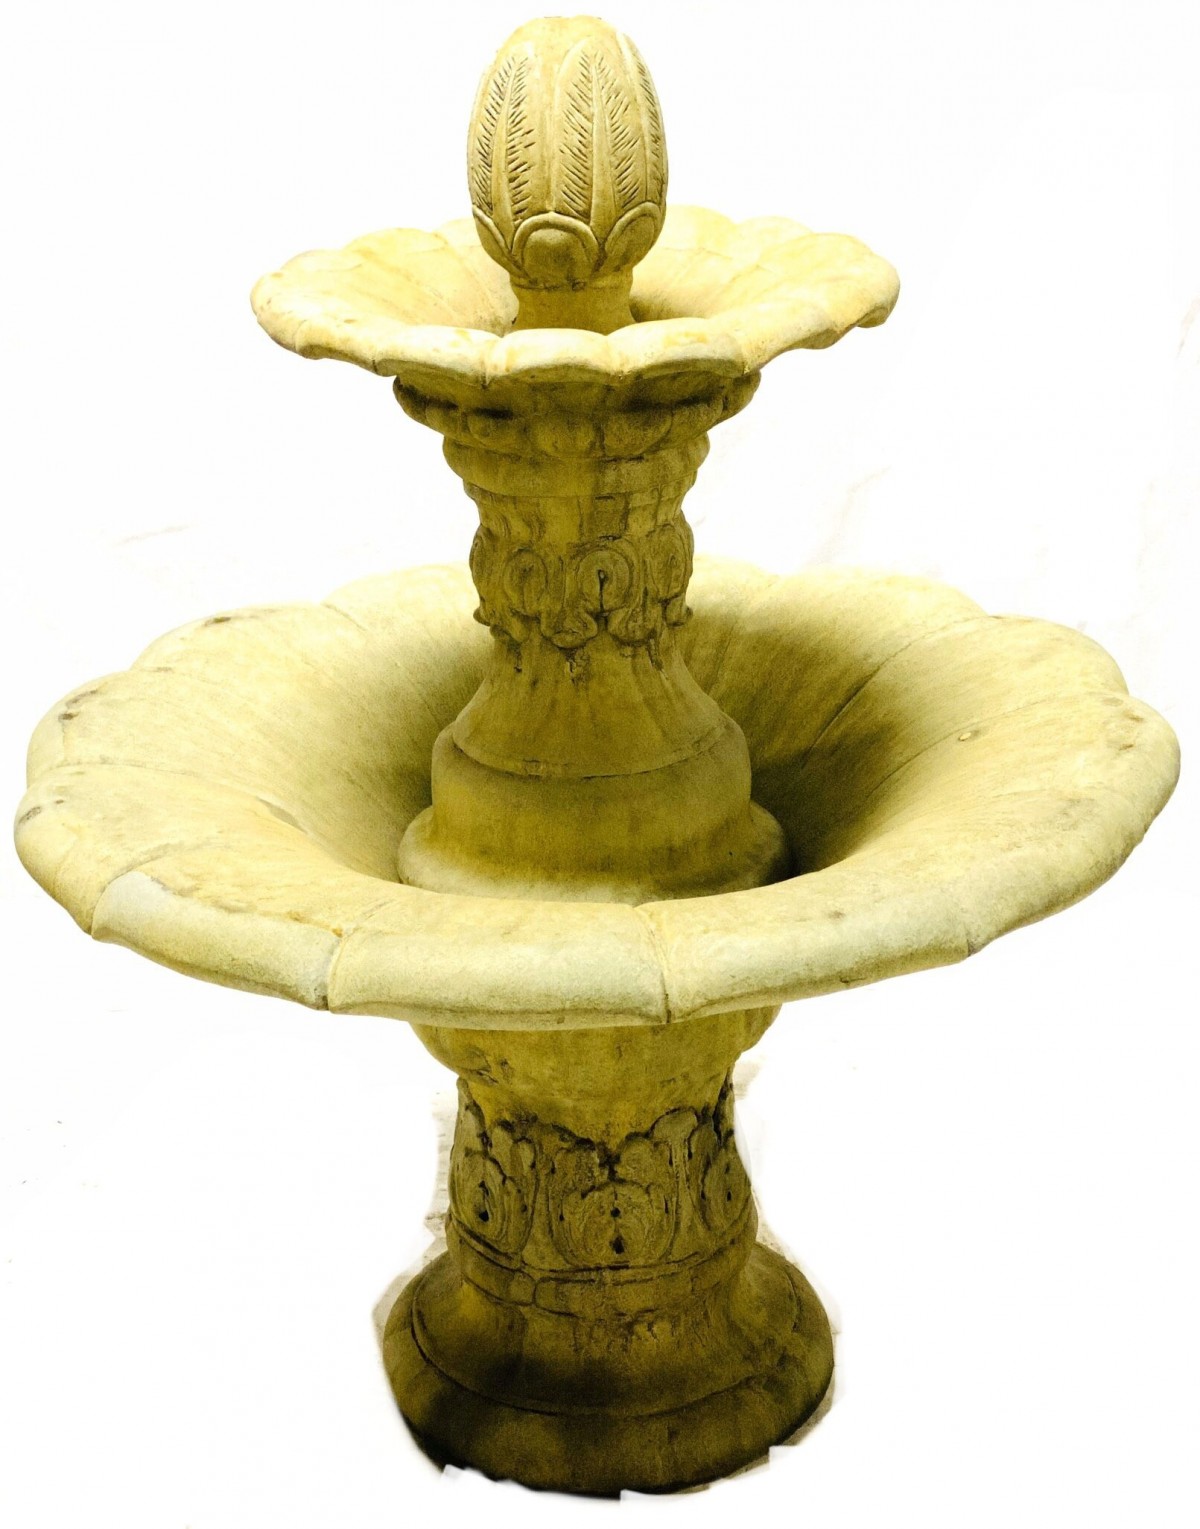 95511 2-Tier Lotus Leaf Fountain (Self Contained) 33 H x 28 Dia., 235 lbs.